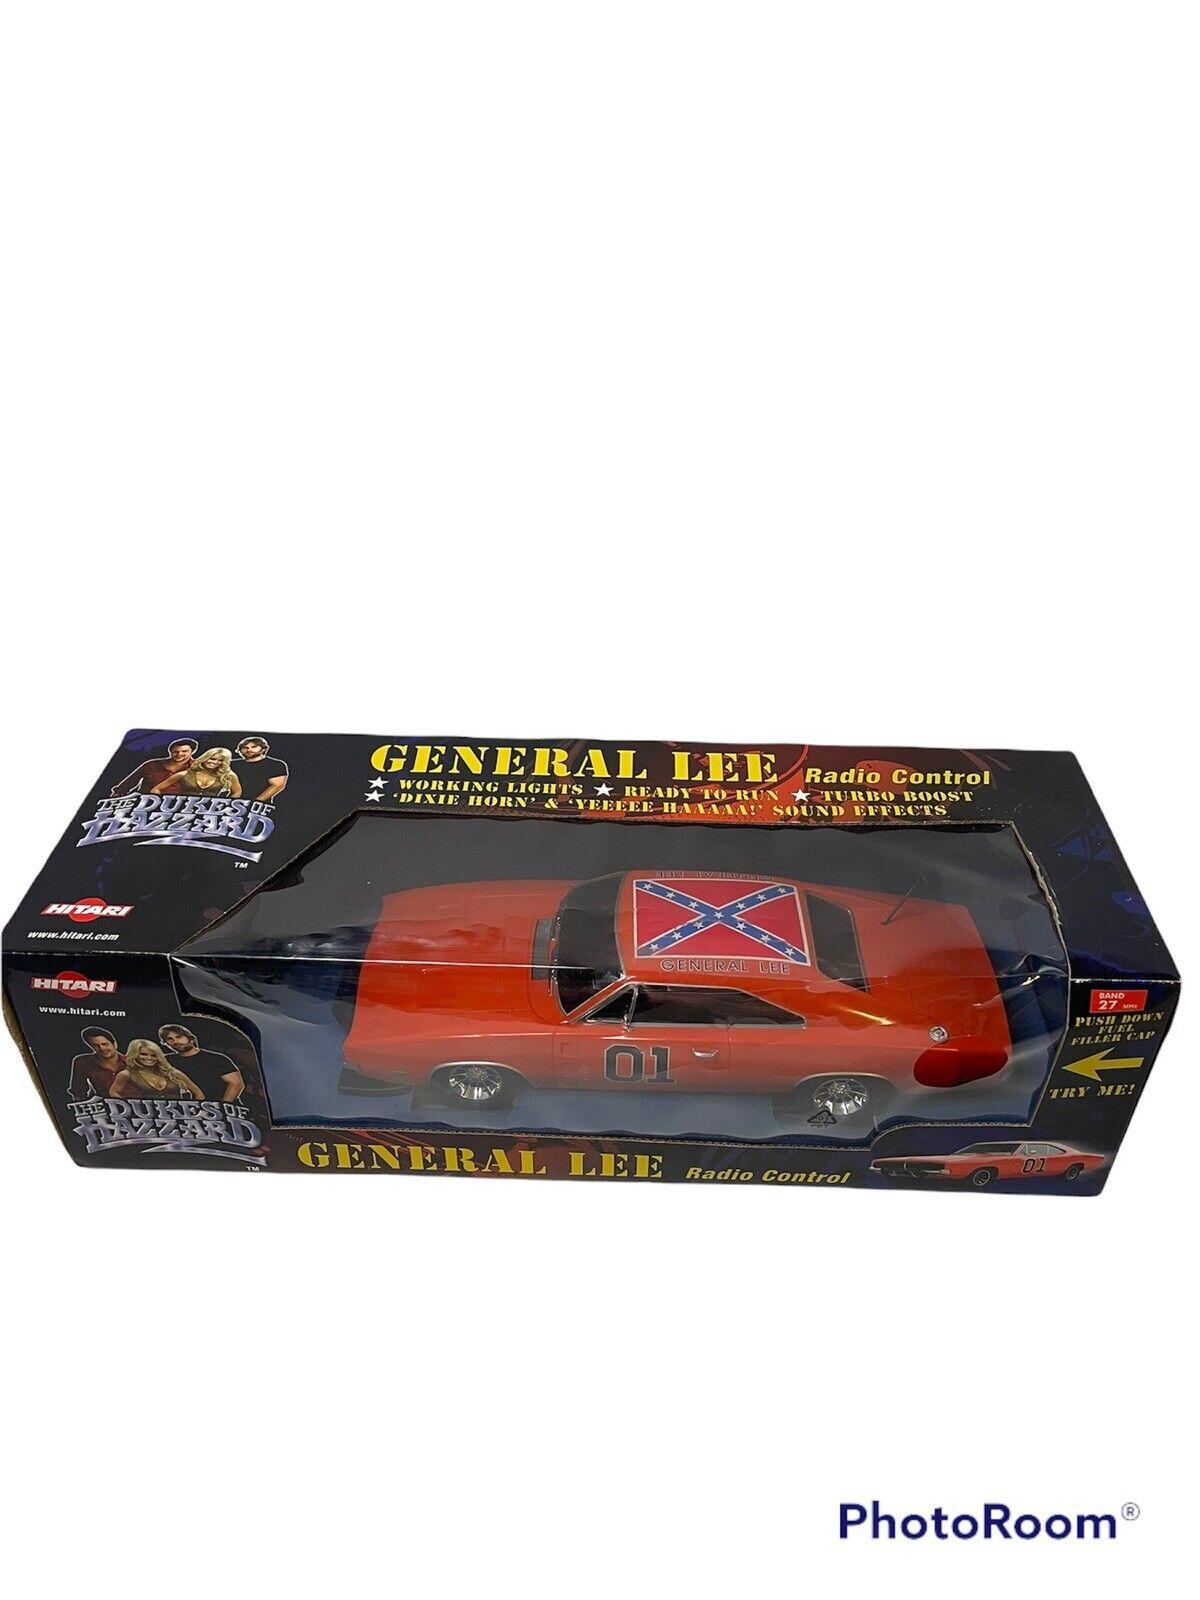 General Lee Rc Car:  Safety and Maintenance